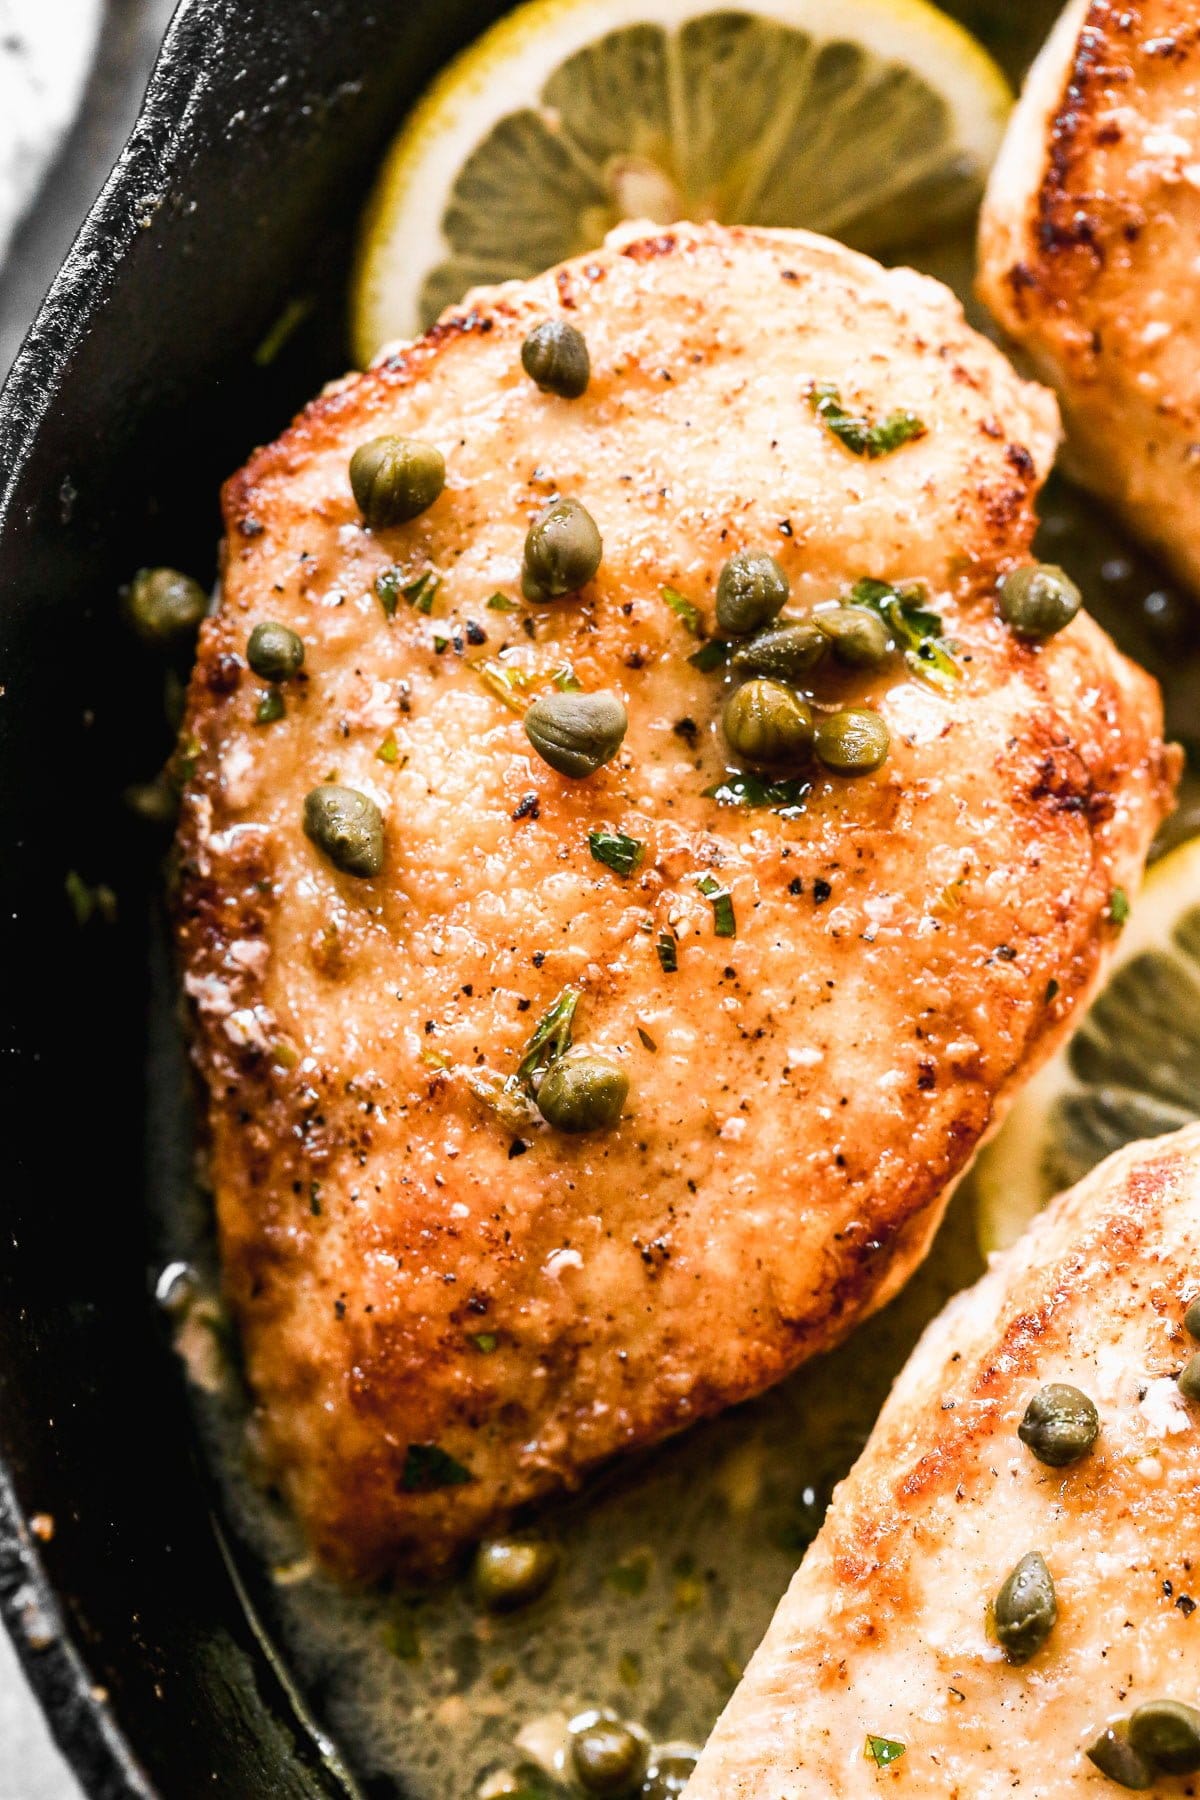 This Healthy Chicken Piccata Recipe&nbsp;will quickly become your new favorite weeknight dinner! Thin chicken breasts are sautéed in butter until crusty and golden brown, then smothered in a zippy lemon and white wine butter sauce. Easy, light and so delicious!&nbsp;